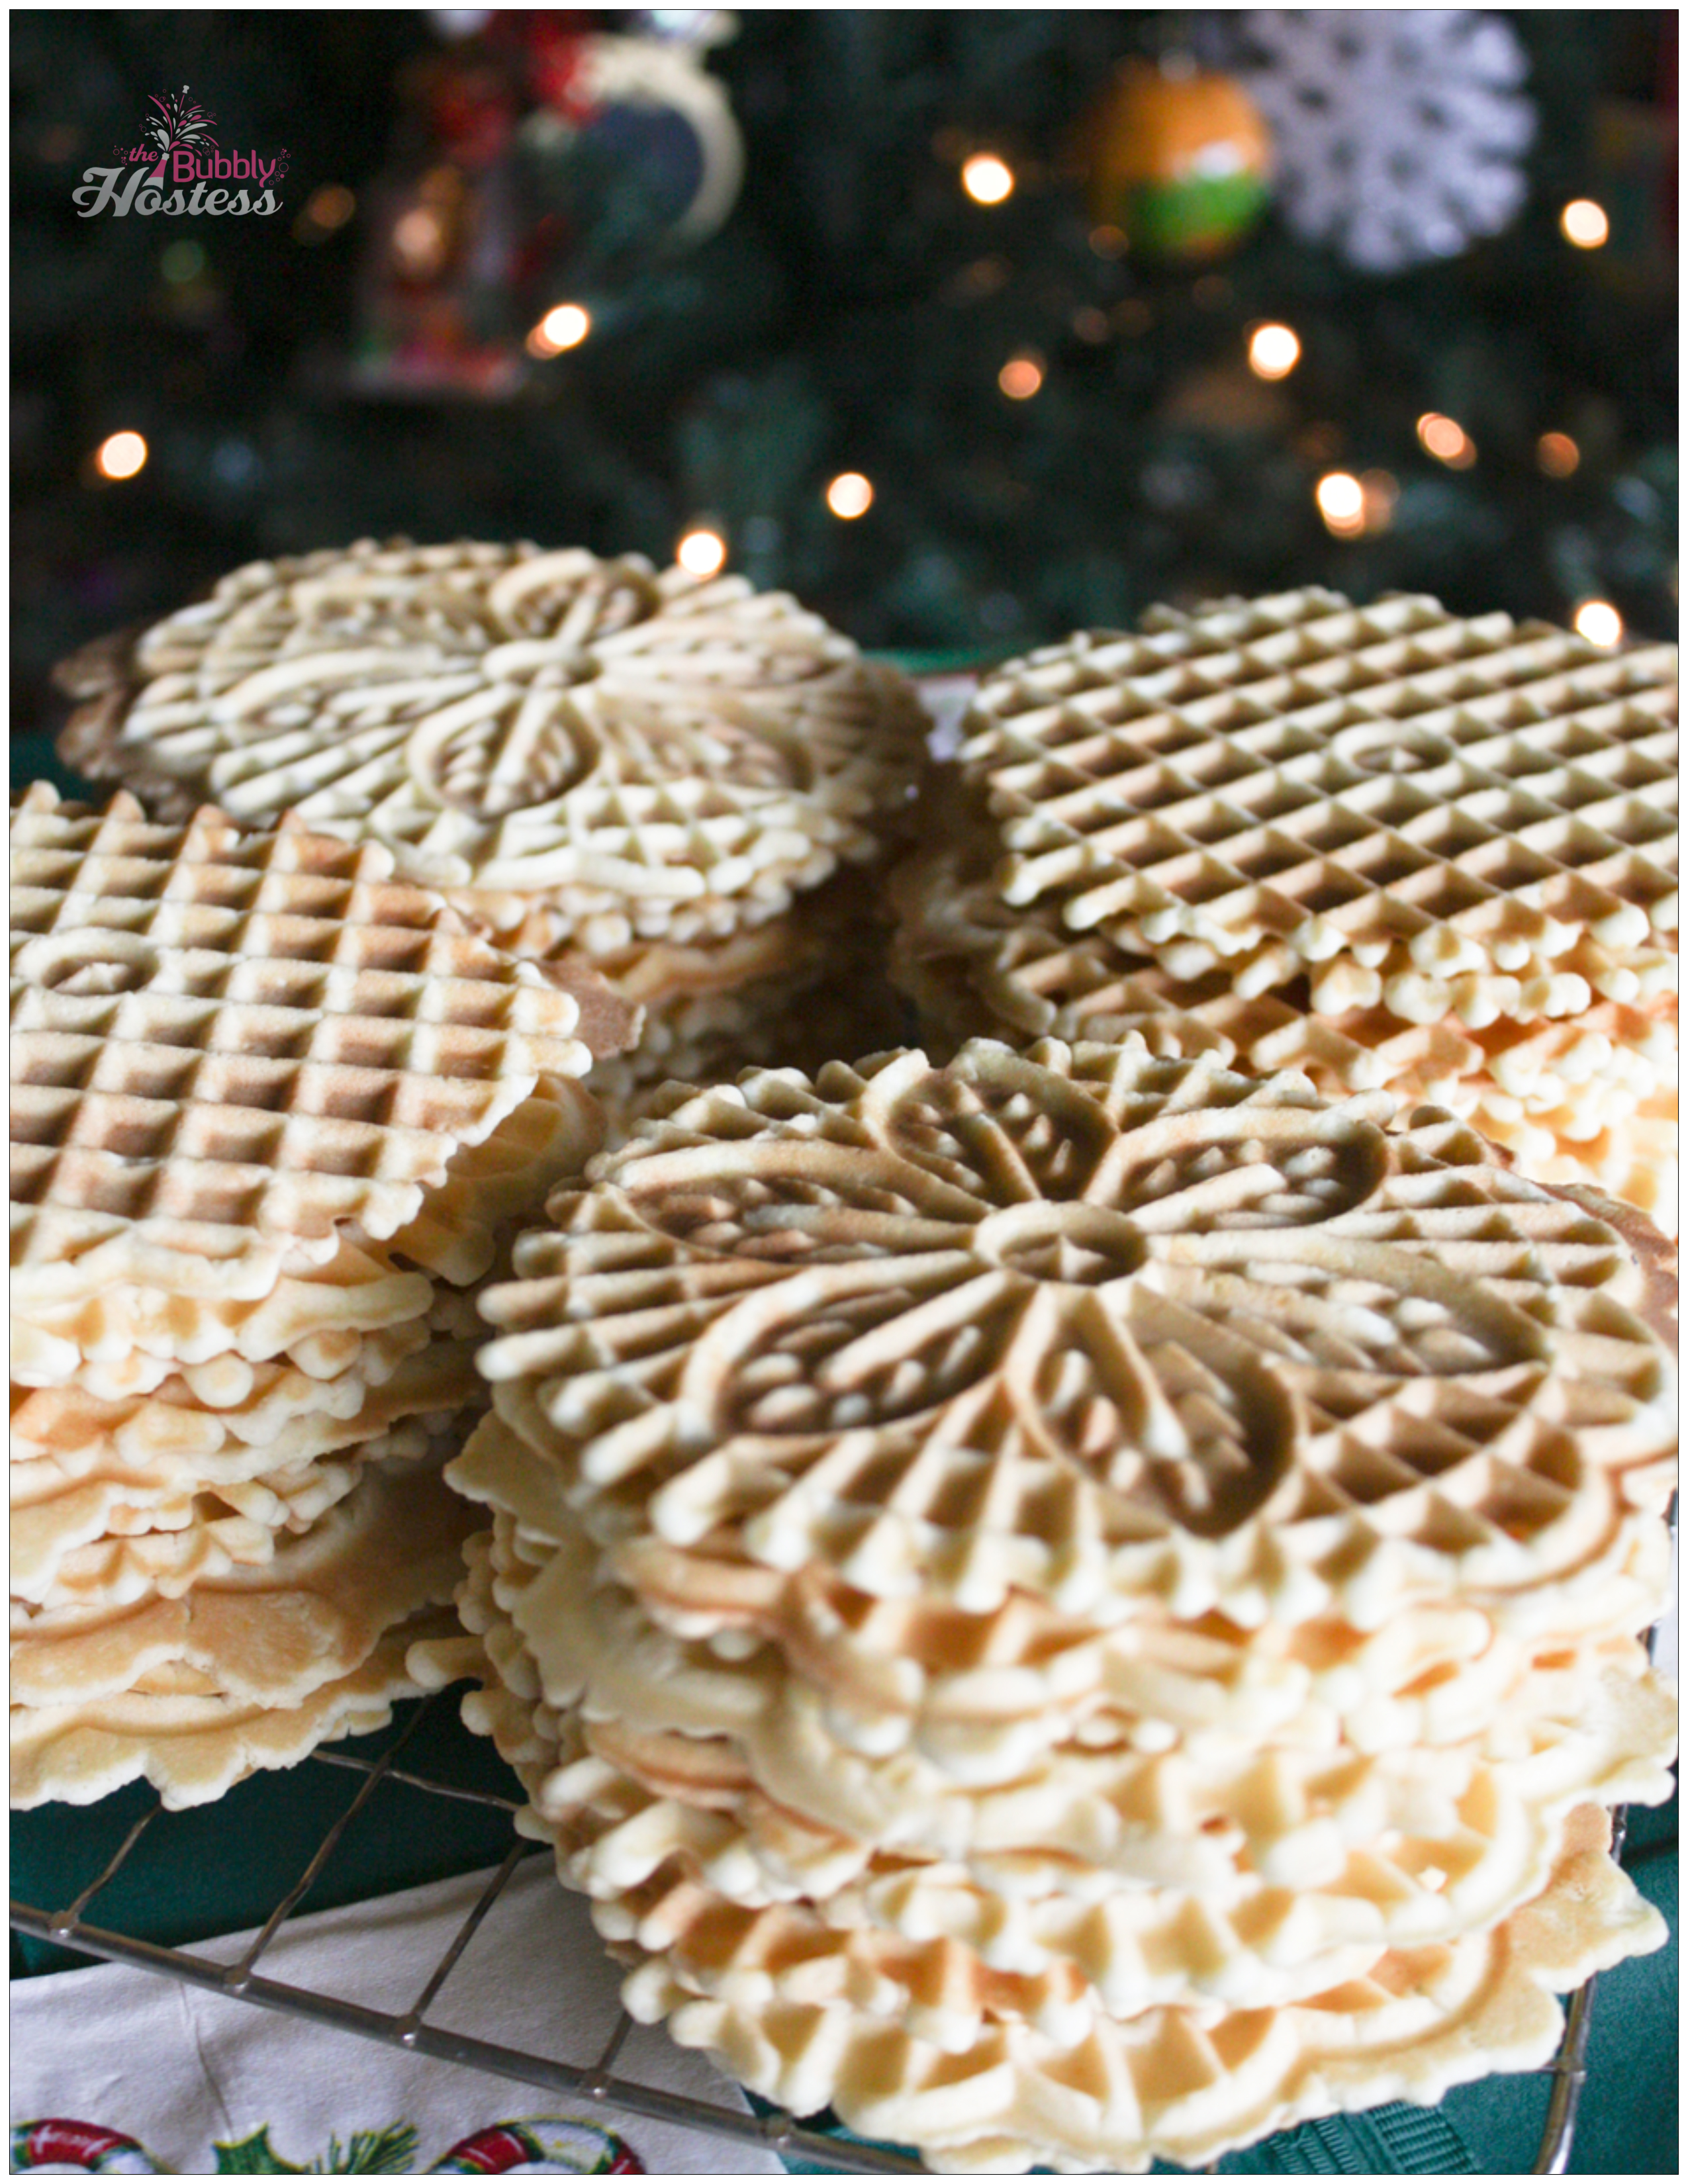 Pizzelle Cookies - An Italian Christmas Tradition | The Bubbly Hostess